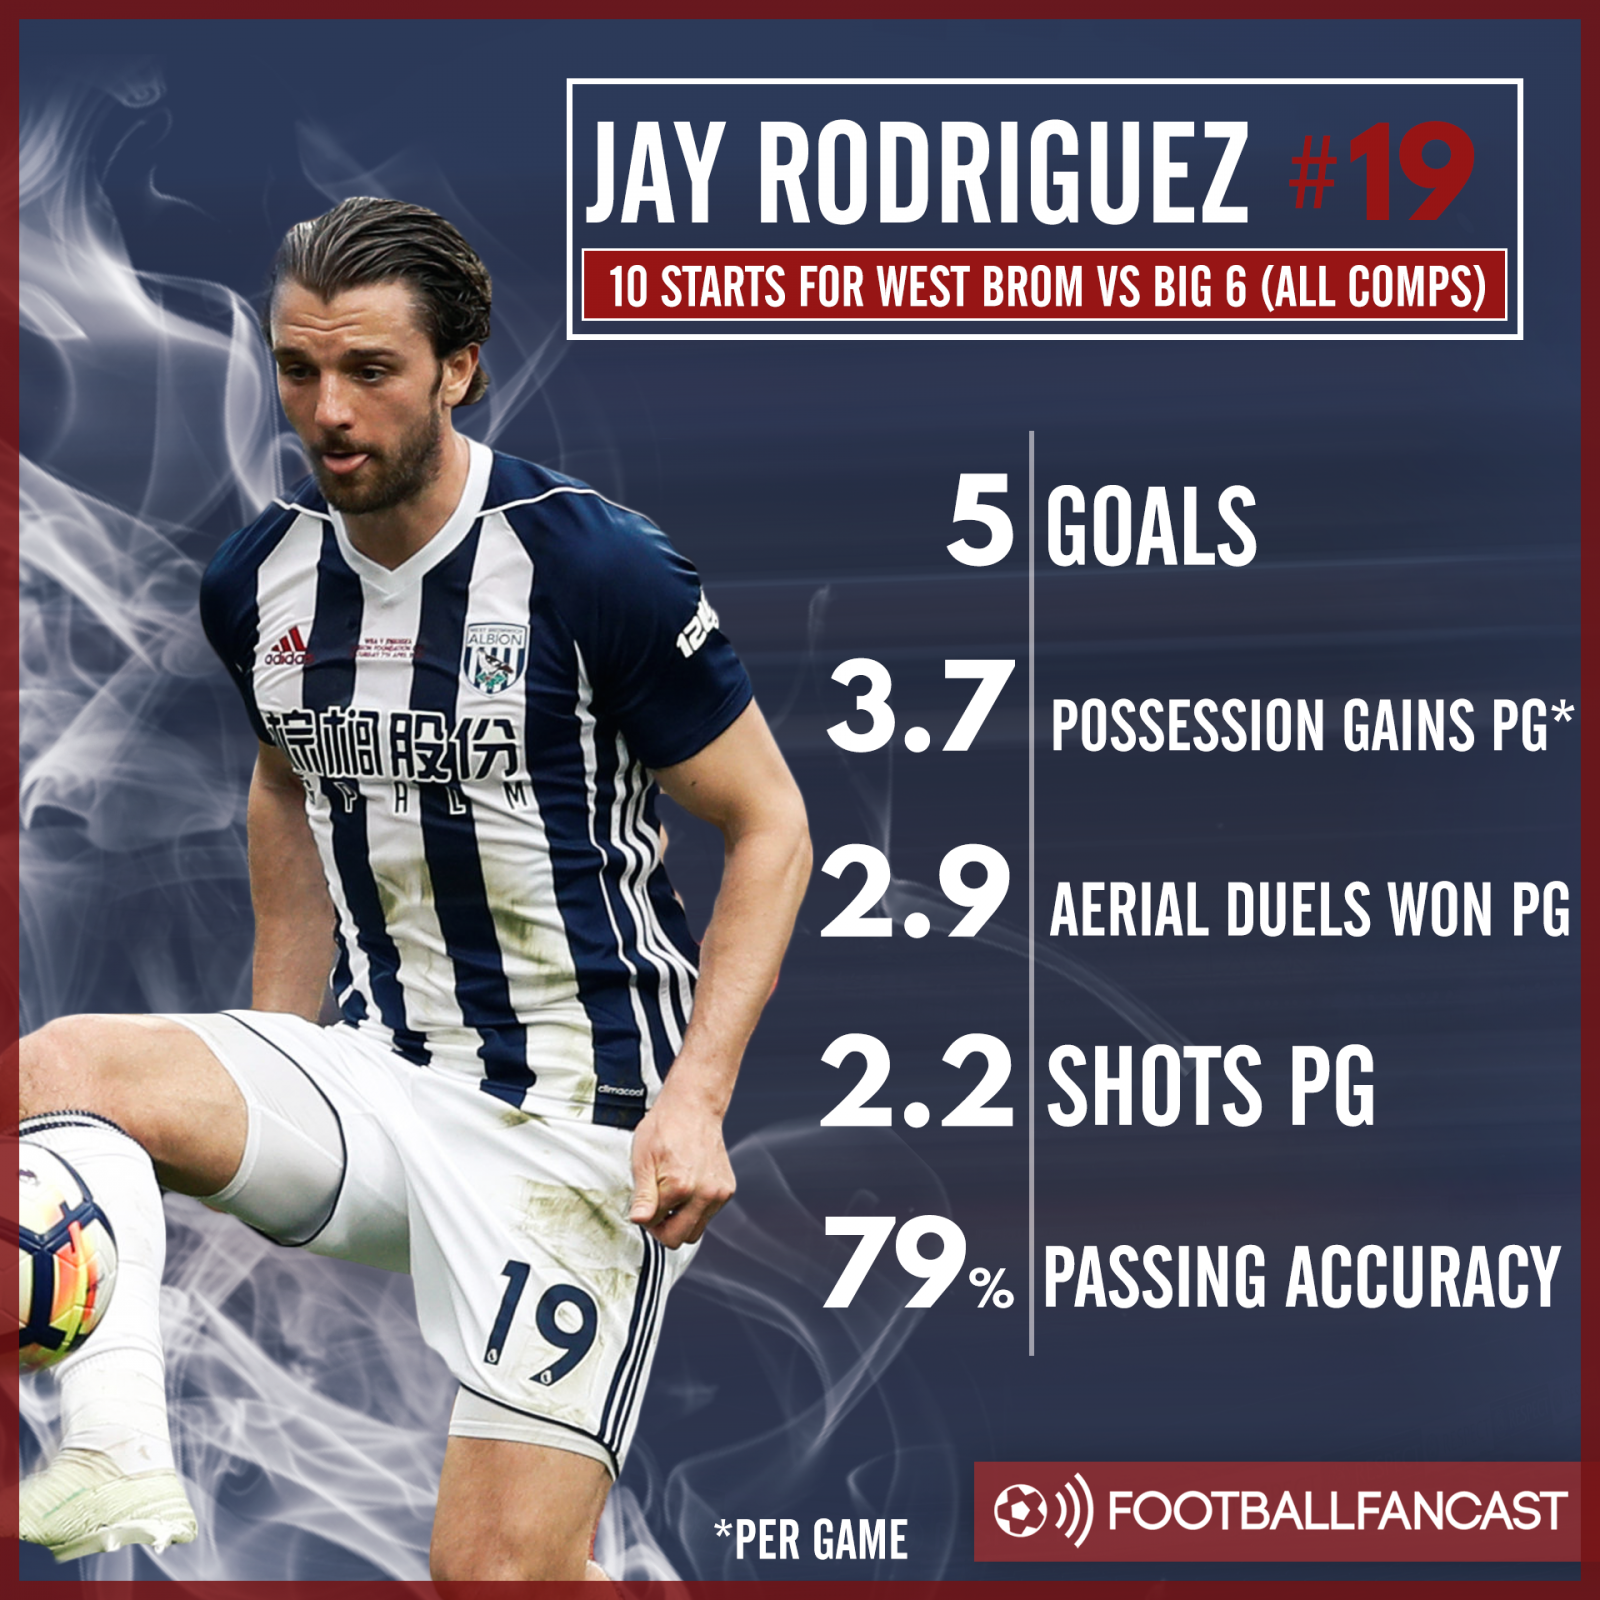 Jay Rodriguez's stats against the Big Six this season